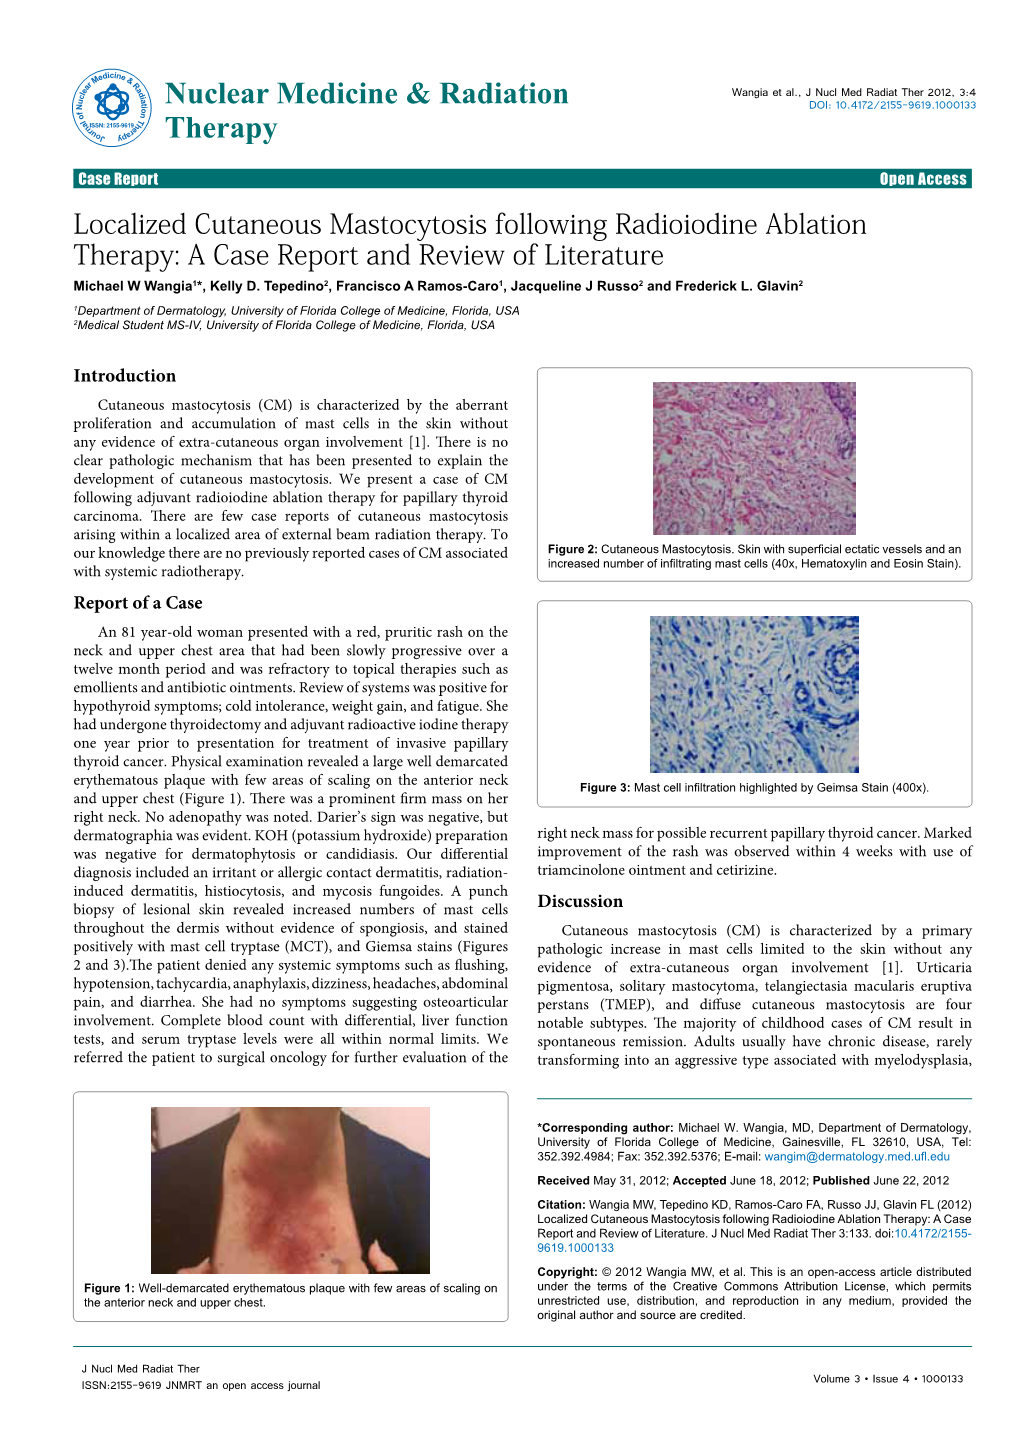 Localized Cutaneous Mastocytosis Following Radioiodine Ablation Therapy: a Case Report and Review of Literature Michael W Wangia1*, Kelly D